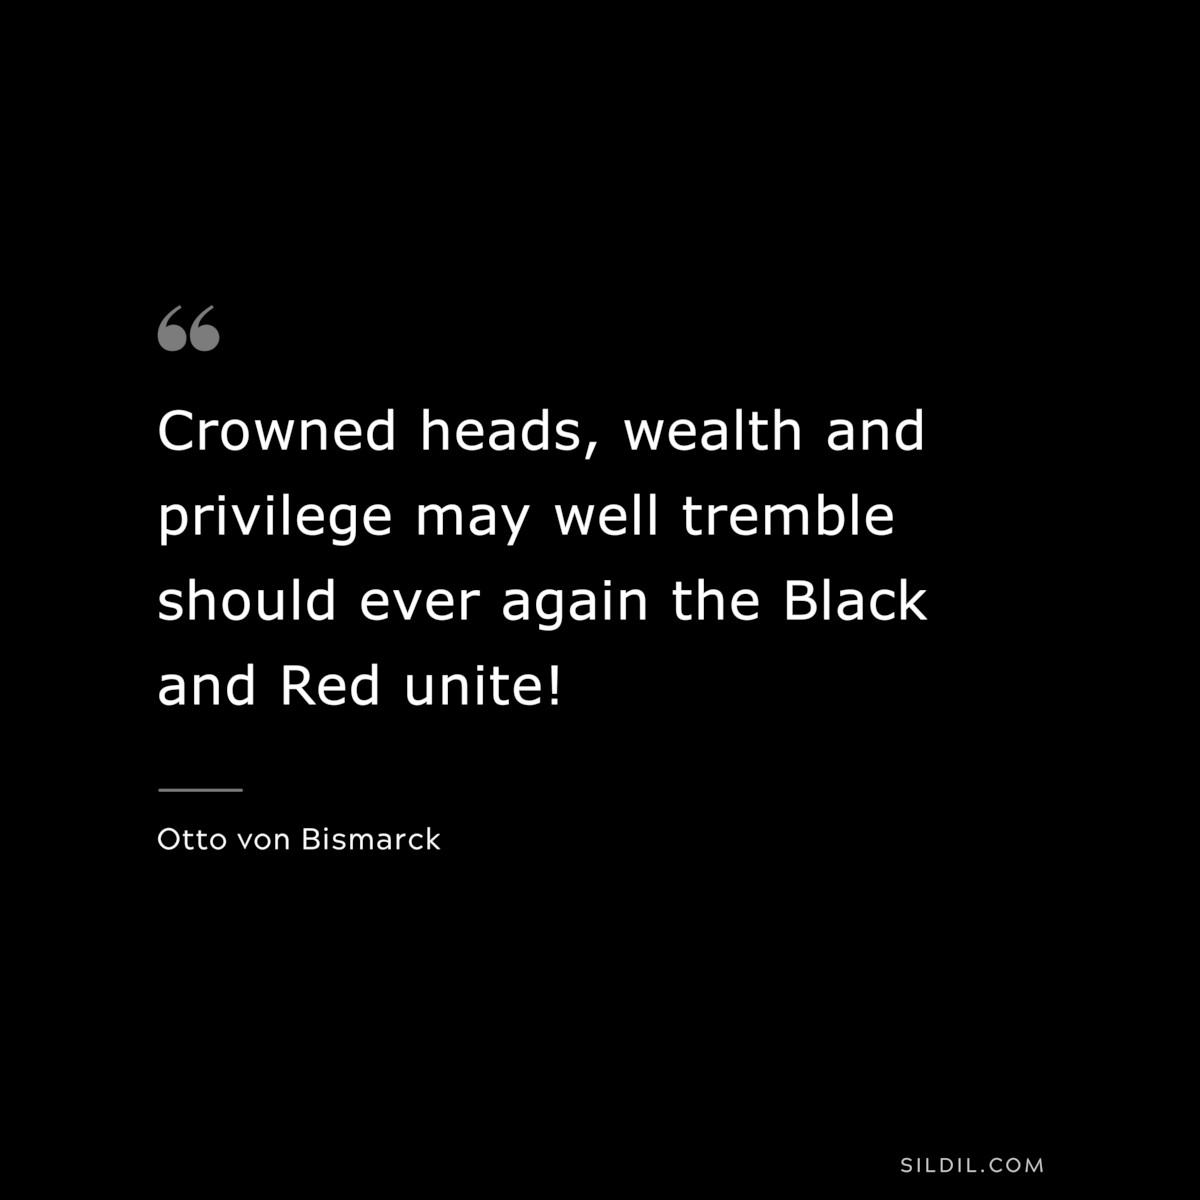 Crowned heads, wealth and privilege may well tremble should ever again the Black and Red unite! ― Otto von Bismarck